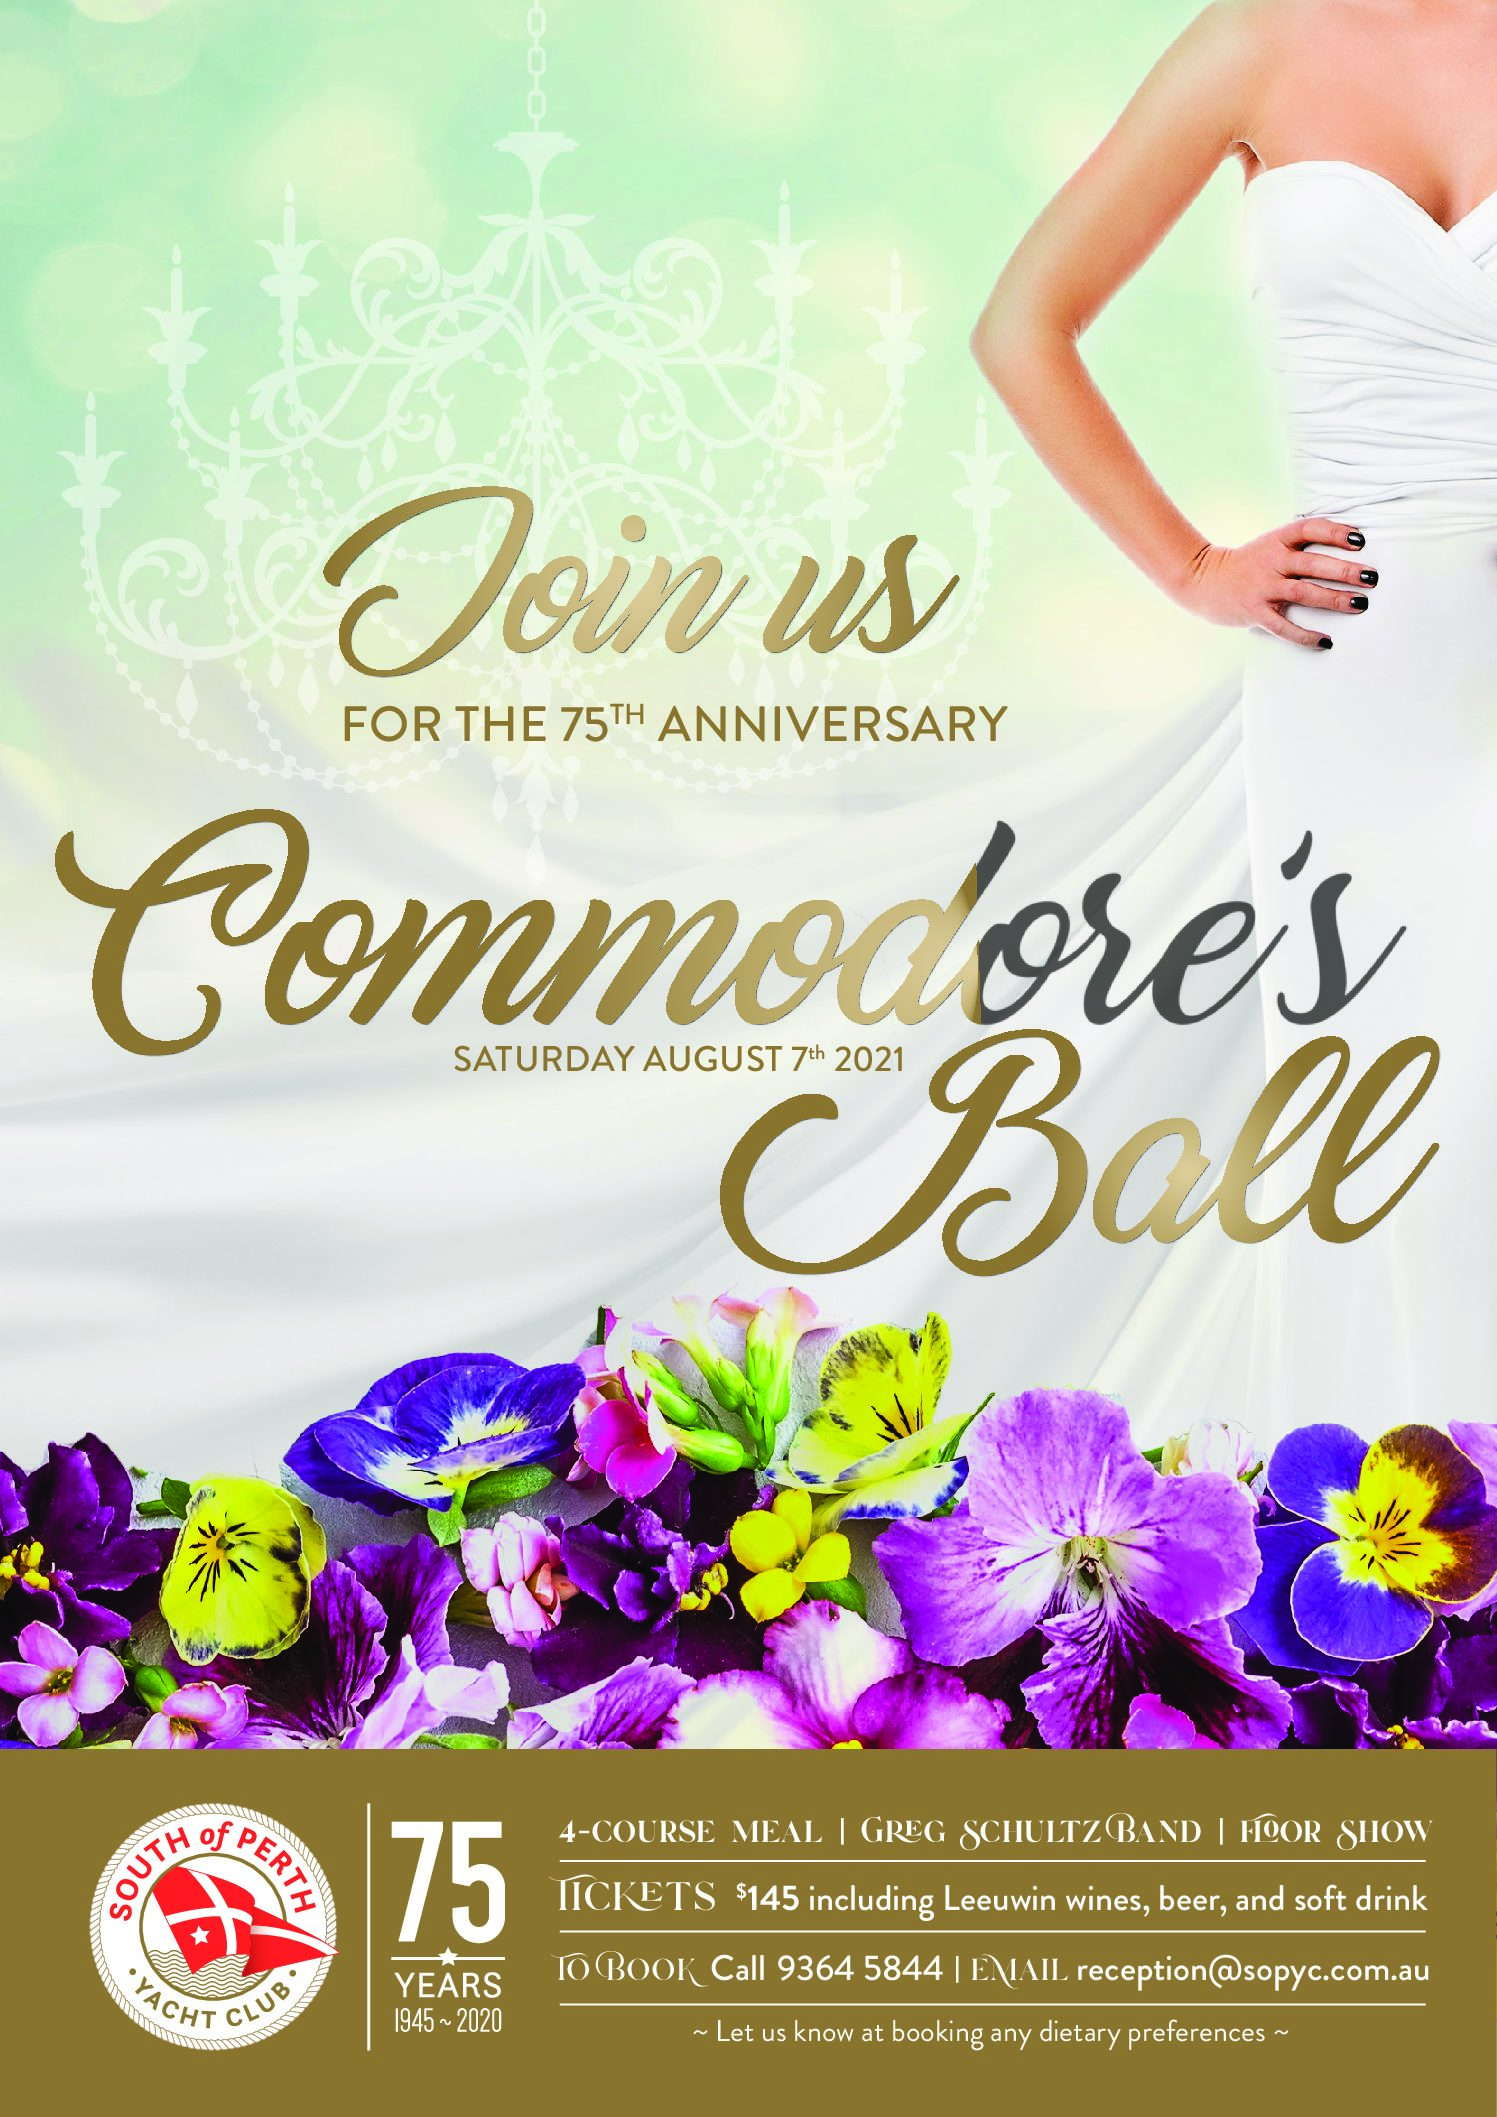 Commodore's Ball - We are taking bookings!